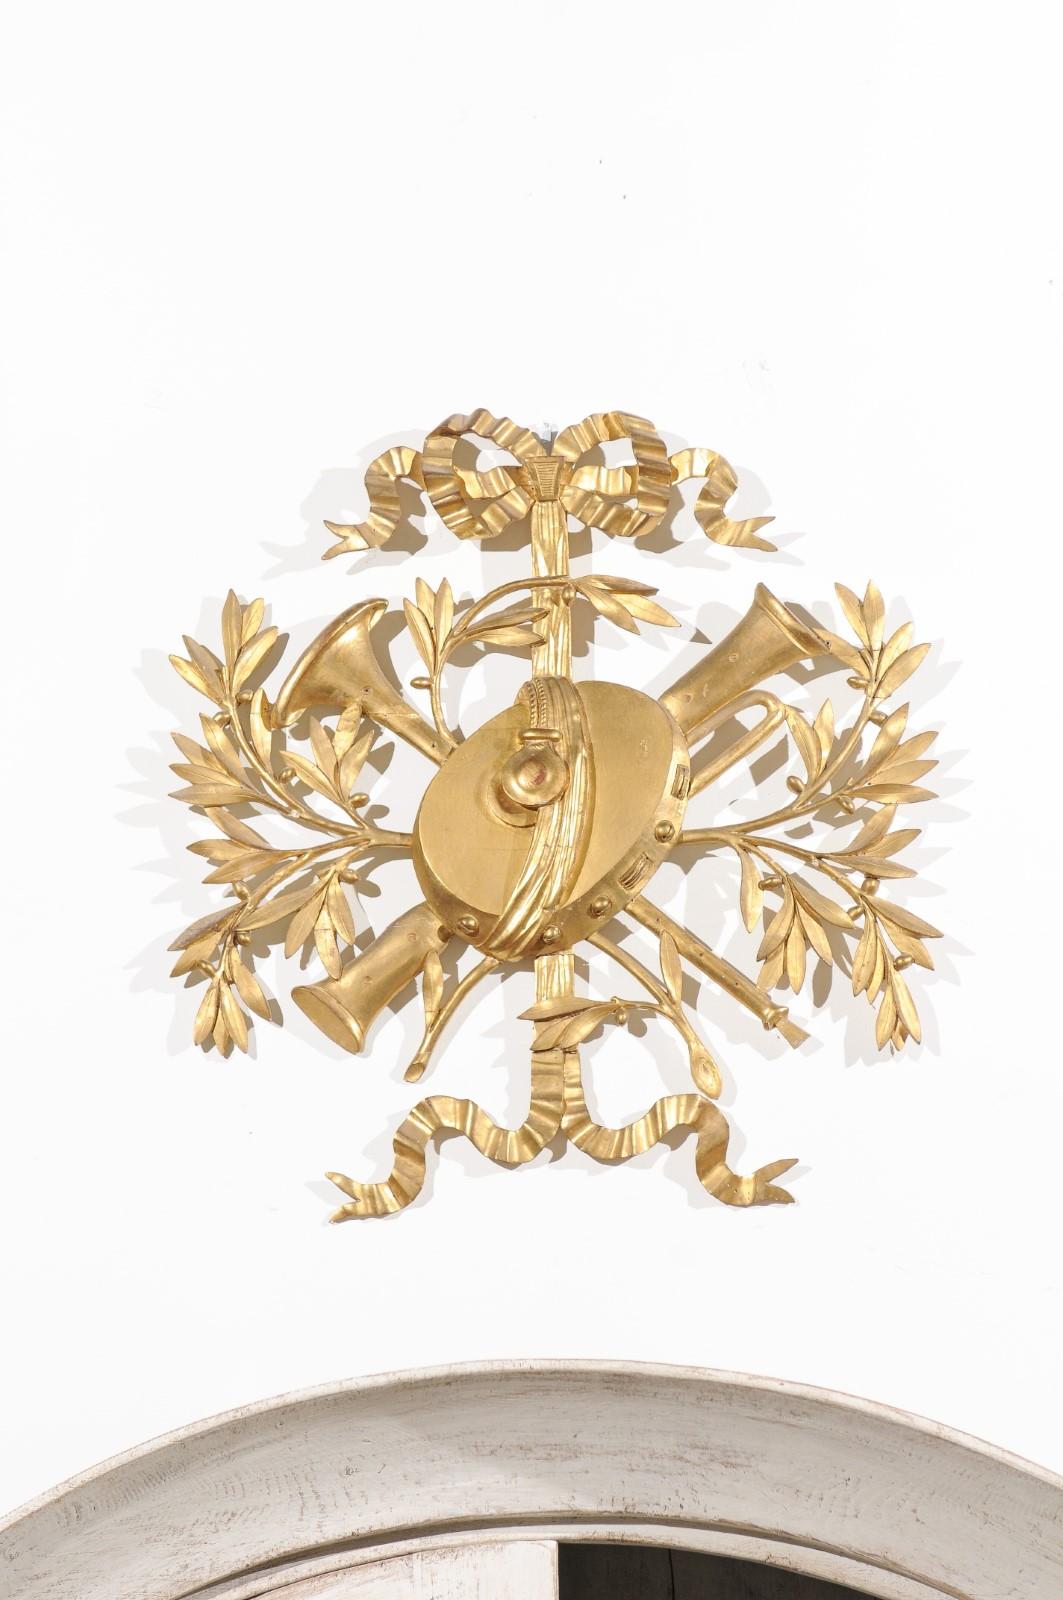 A French Louis XVI hand carved giltwood wall decoration from the second half of the 18th century, with musical trophy, ribbon and foliage. Born in France in the early years of the reign of King Louis XVI, this exquisite wall decoration features a